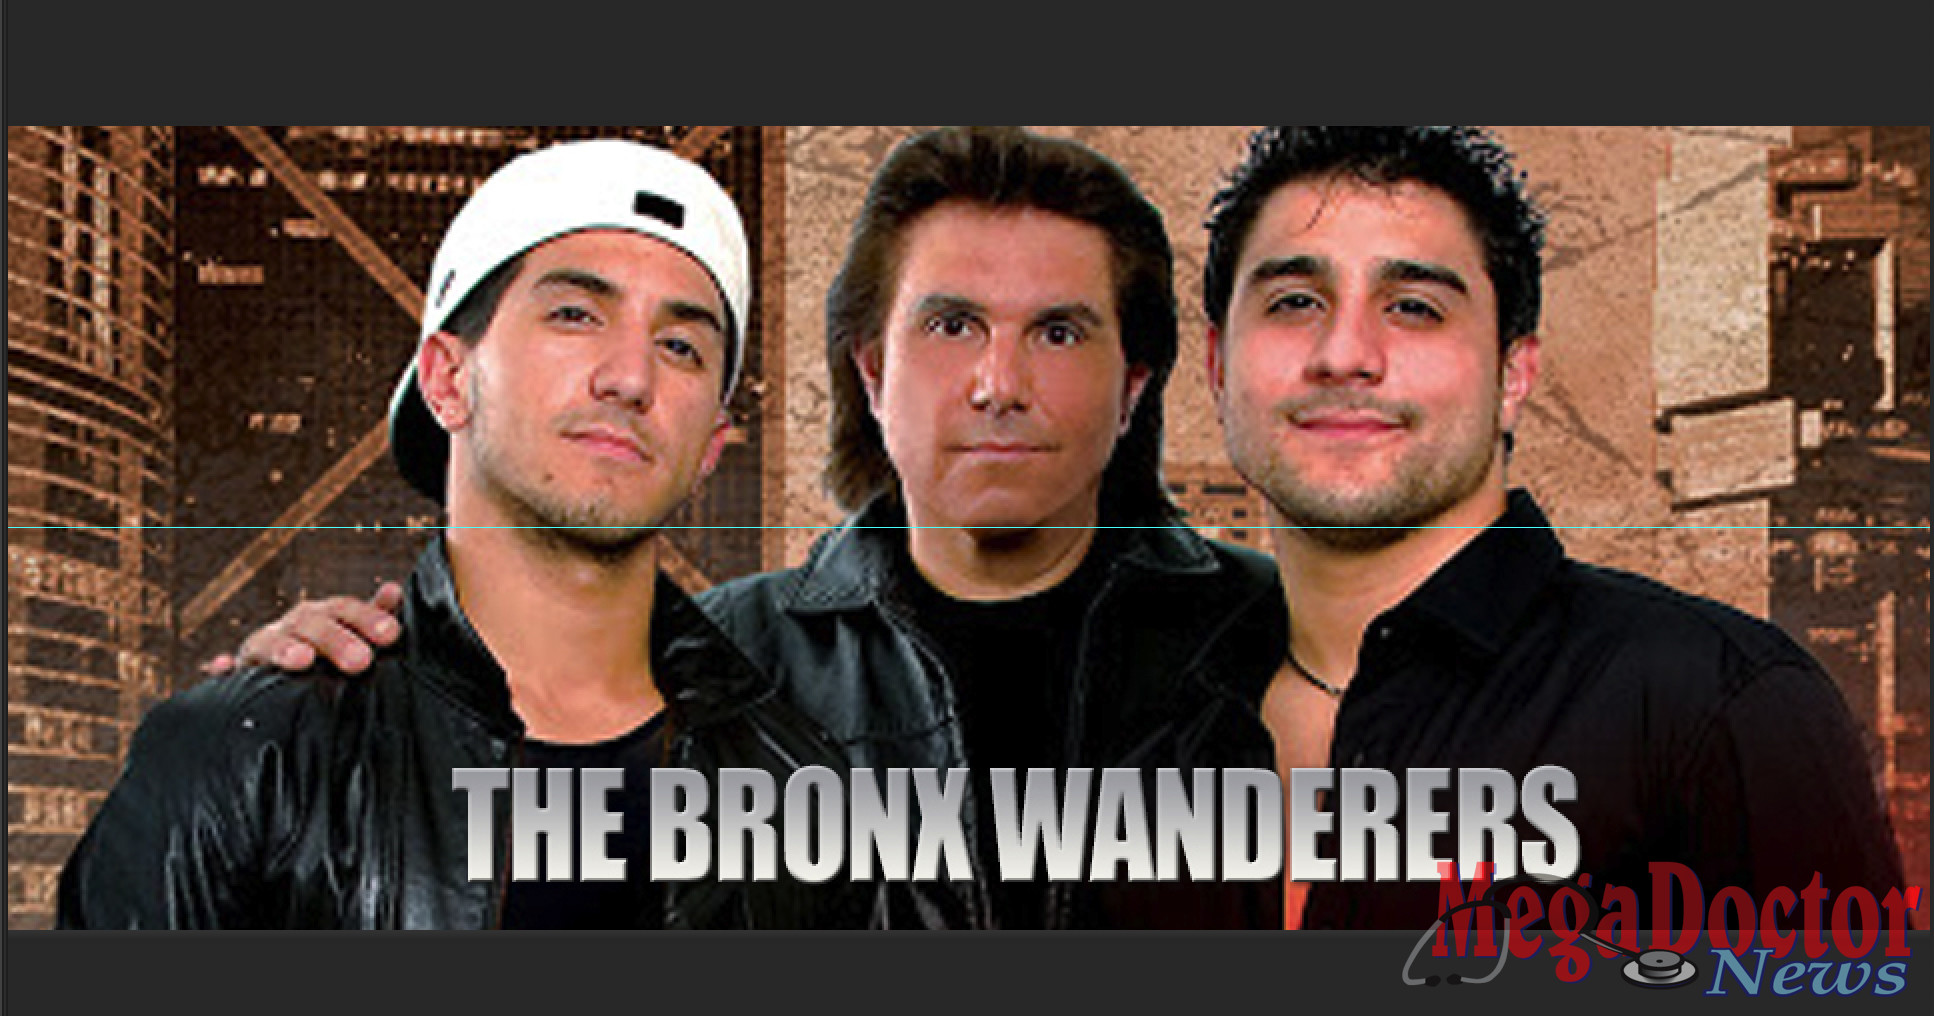 About The Bronx Wanderers With superlative vocals and musicianship, dynamic enthusiasm and a genuine love of the music they perform, The Bronx Wanderers recreate the magic of the era and build an energetic bond with their audience, guaranteeing an evening of toe-tapping, hand-clapping and dancing in the aisles all night long. Their show tells the stories and plays the music that will take you as close as you can get to having lived the actual experience. The Wanderers arrive at every show with new material all the time but never leave out the favorites that their fans and audiences have come to love. Not to be forgotten, are the popular Frankie Valli medleys that this group “nails” say the critics. “It never gets old,” says lead singer Yo’ Vinny. “It just doesn’t get better than this. We don’t rest on our laurels. We never will.”